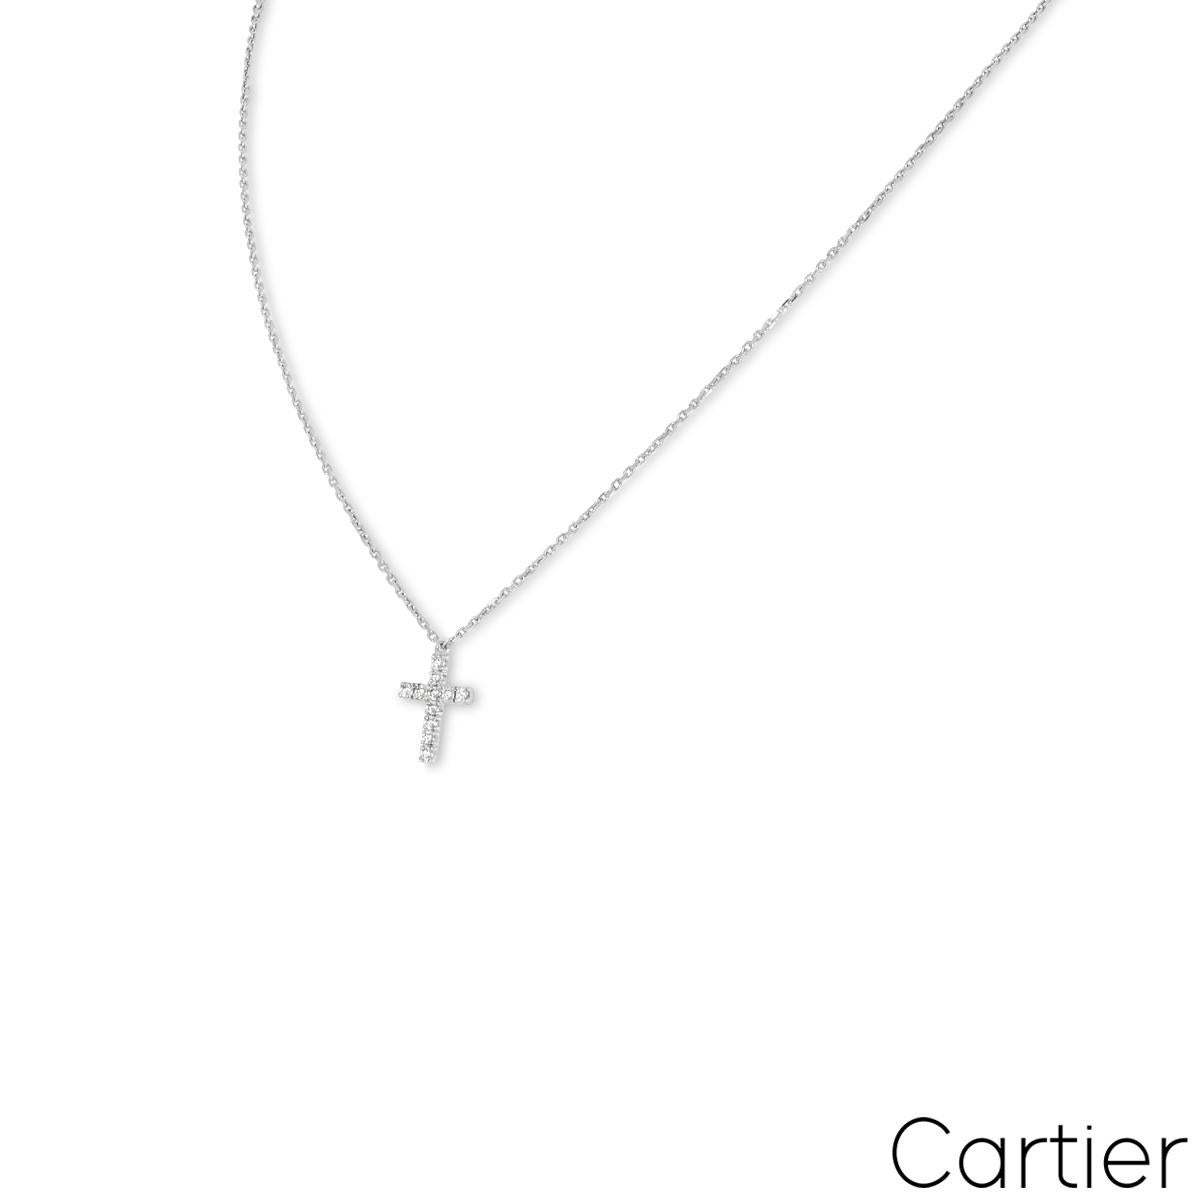 A lovely 18k white gold diamond pendant by Cartier from the Symbols collection. The pendant features a cross motif pave set with 11 round brilliant cut diamonds with an approximate total weight of 0.13ct, predominately F colour and VS clarity. The